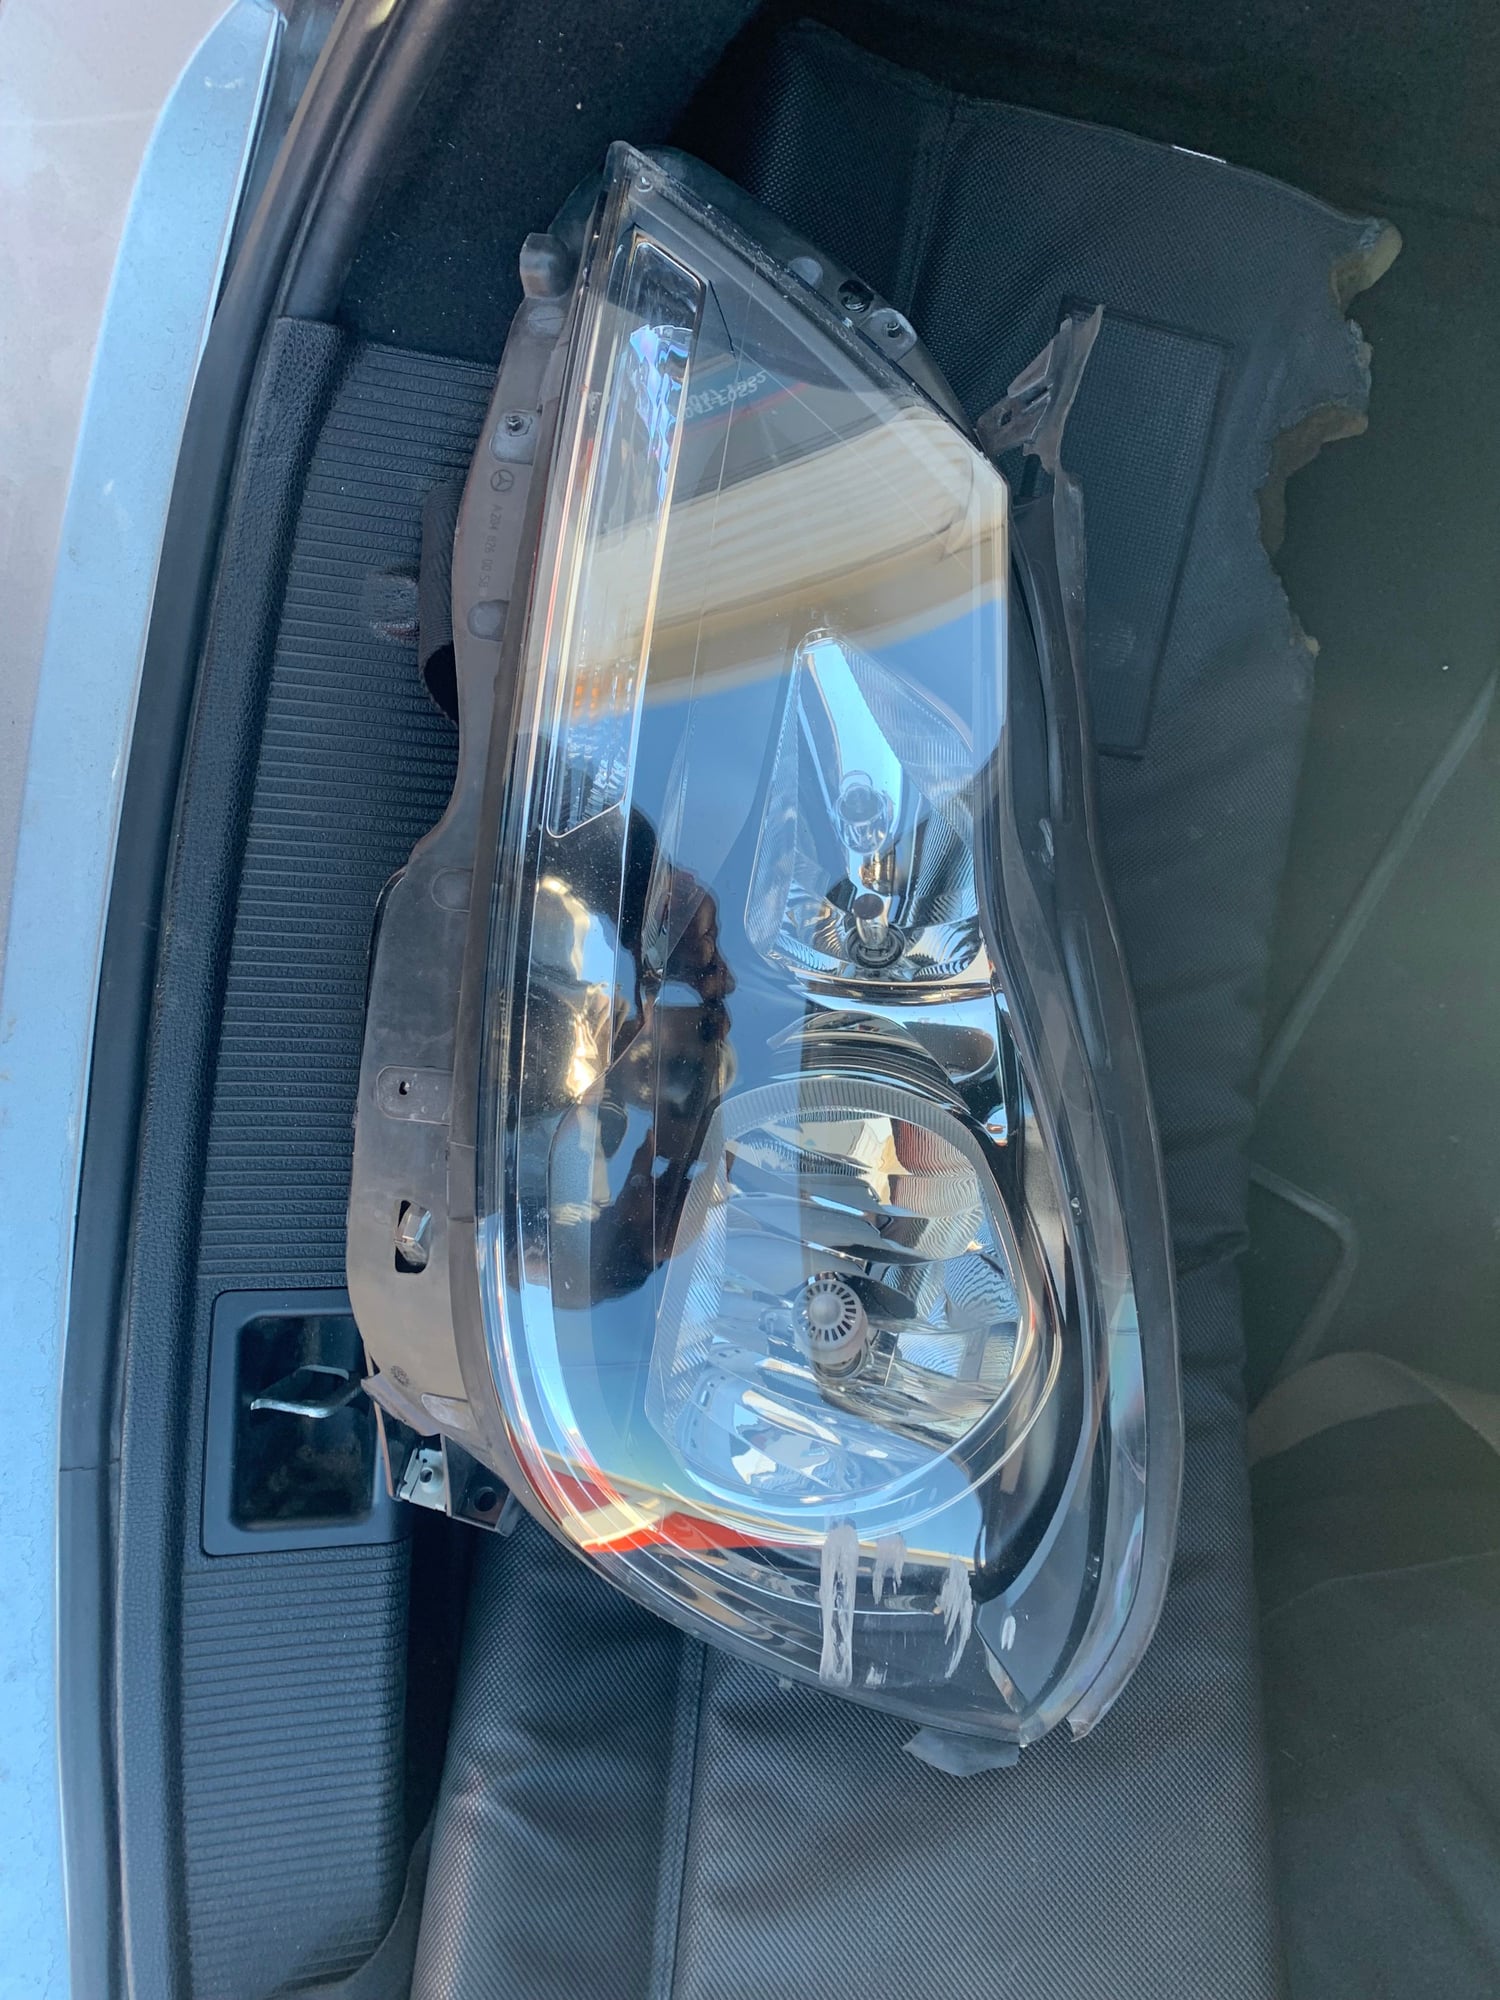 Lights - W204 AMG C63 OEM Headlights  300.00 obo - Used - 2012 to 2014 Mercedes-Benz C63 AMG - Yonkers, NY 10701, United States